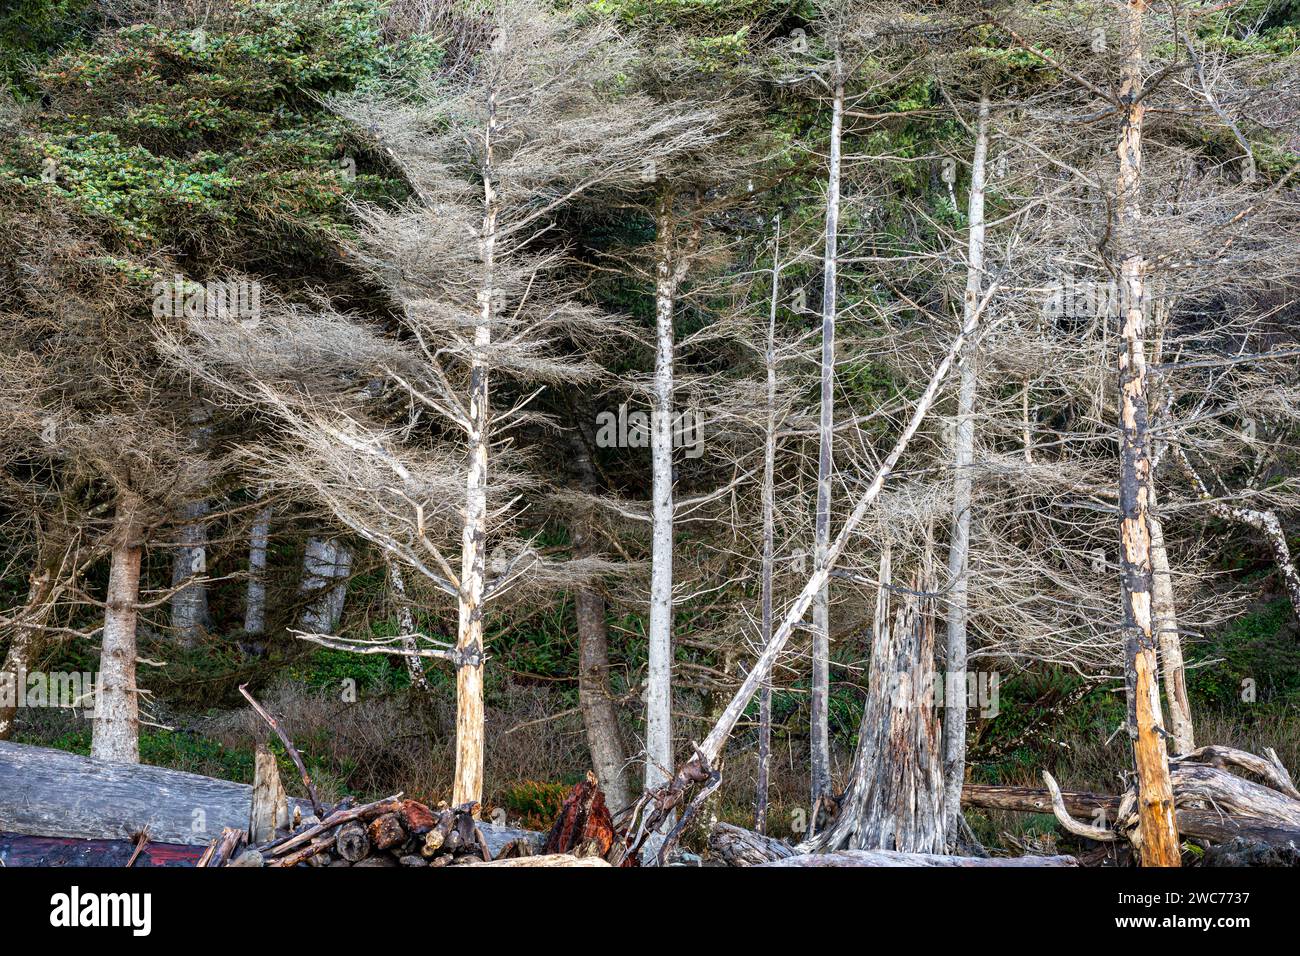 WA23990-00...WASHINGTON - Trees along Rialto Beach killed by salt water and giant logs washed up on shore in Olympic National Park. Stock Photo